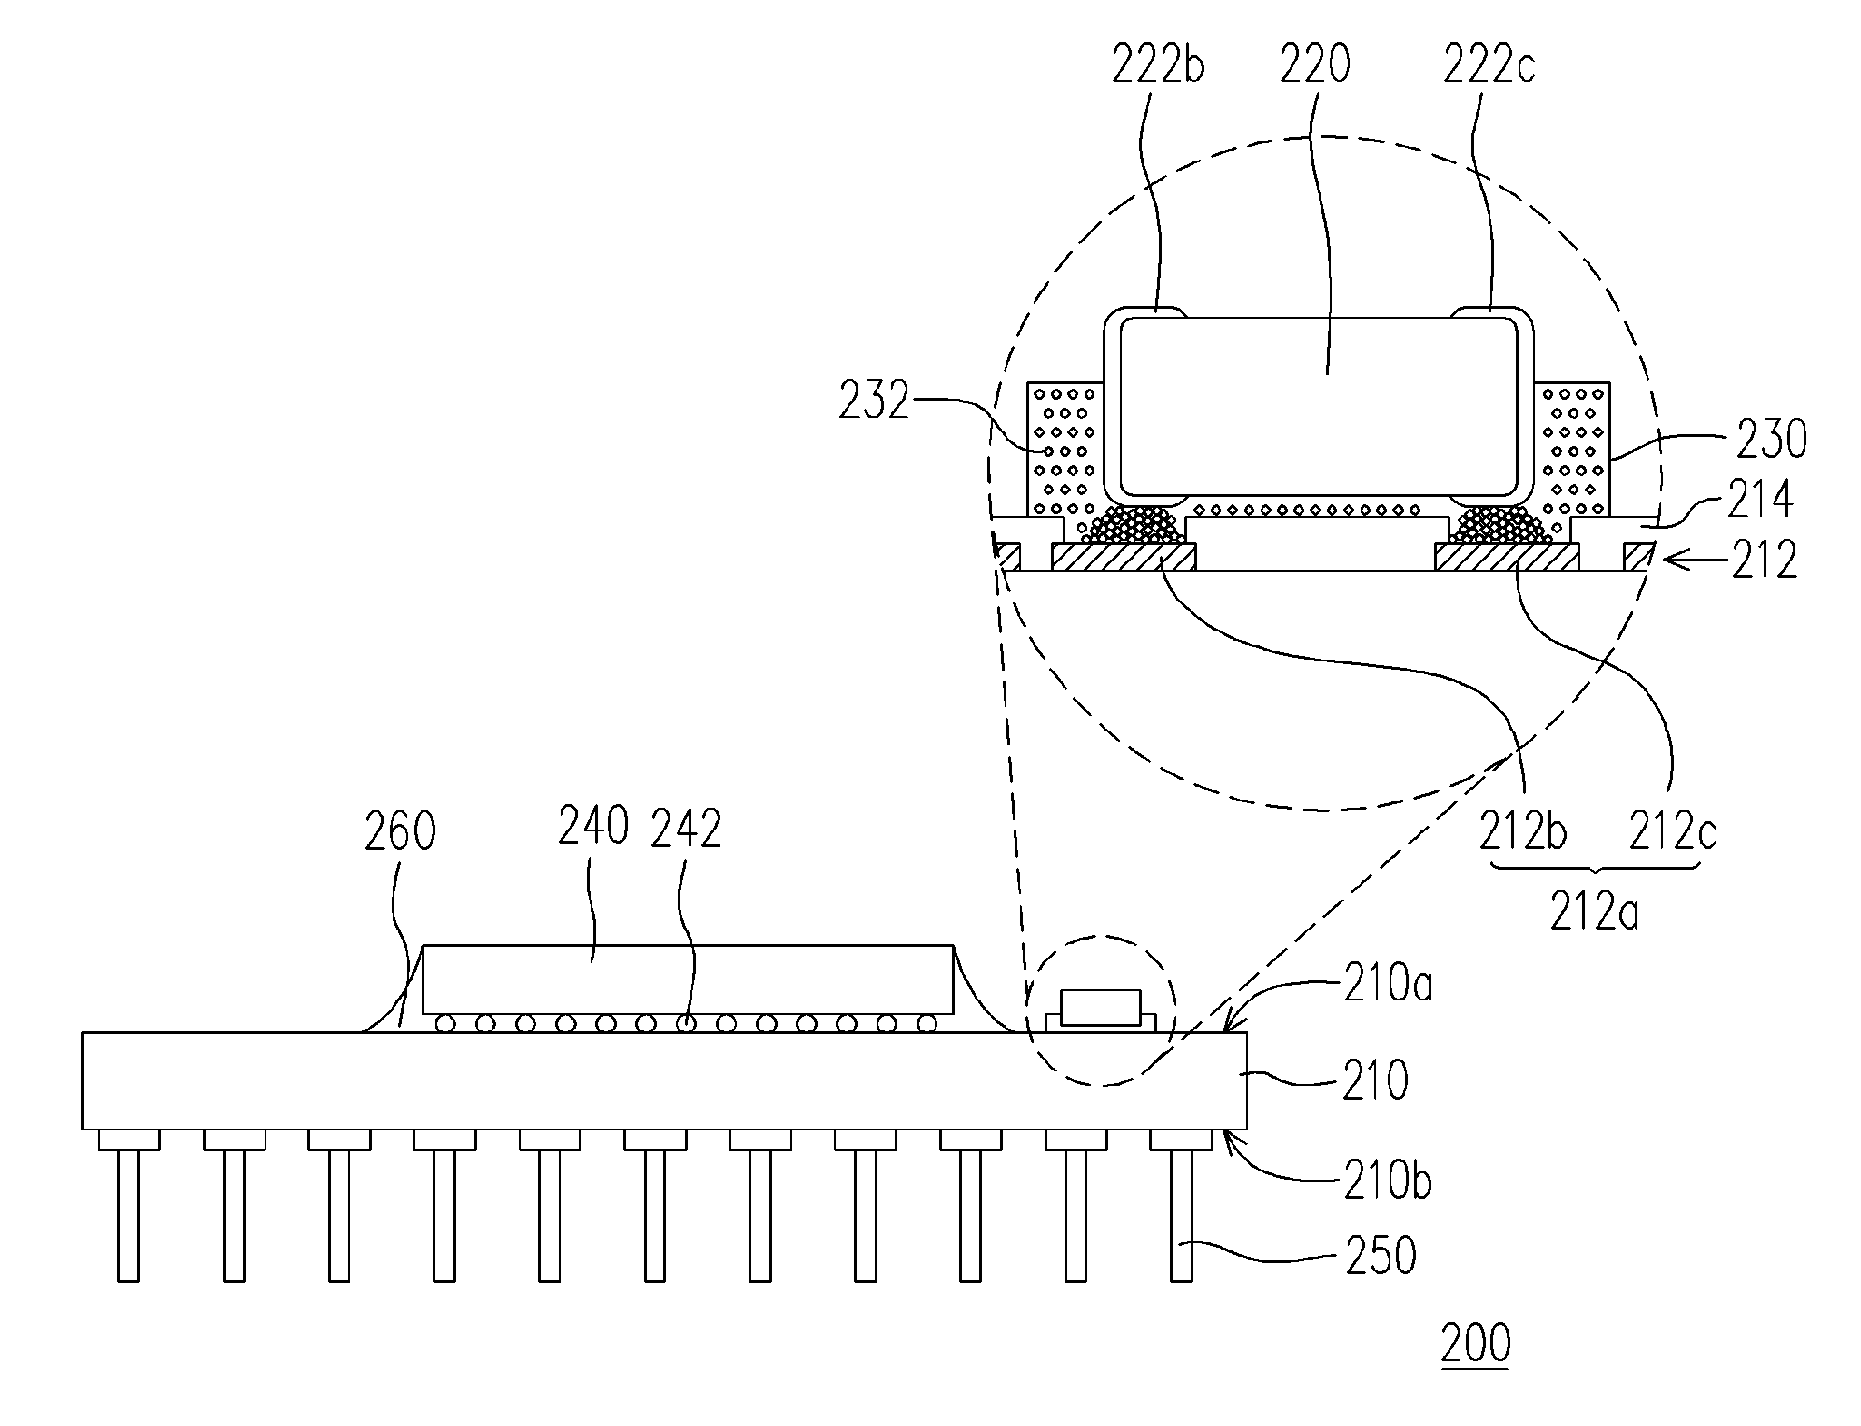 Electronic package with passive components